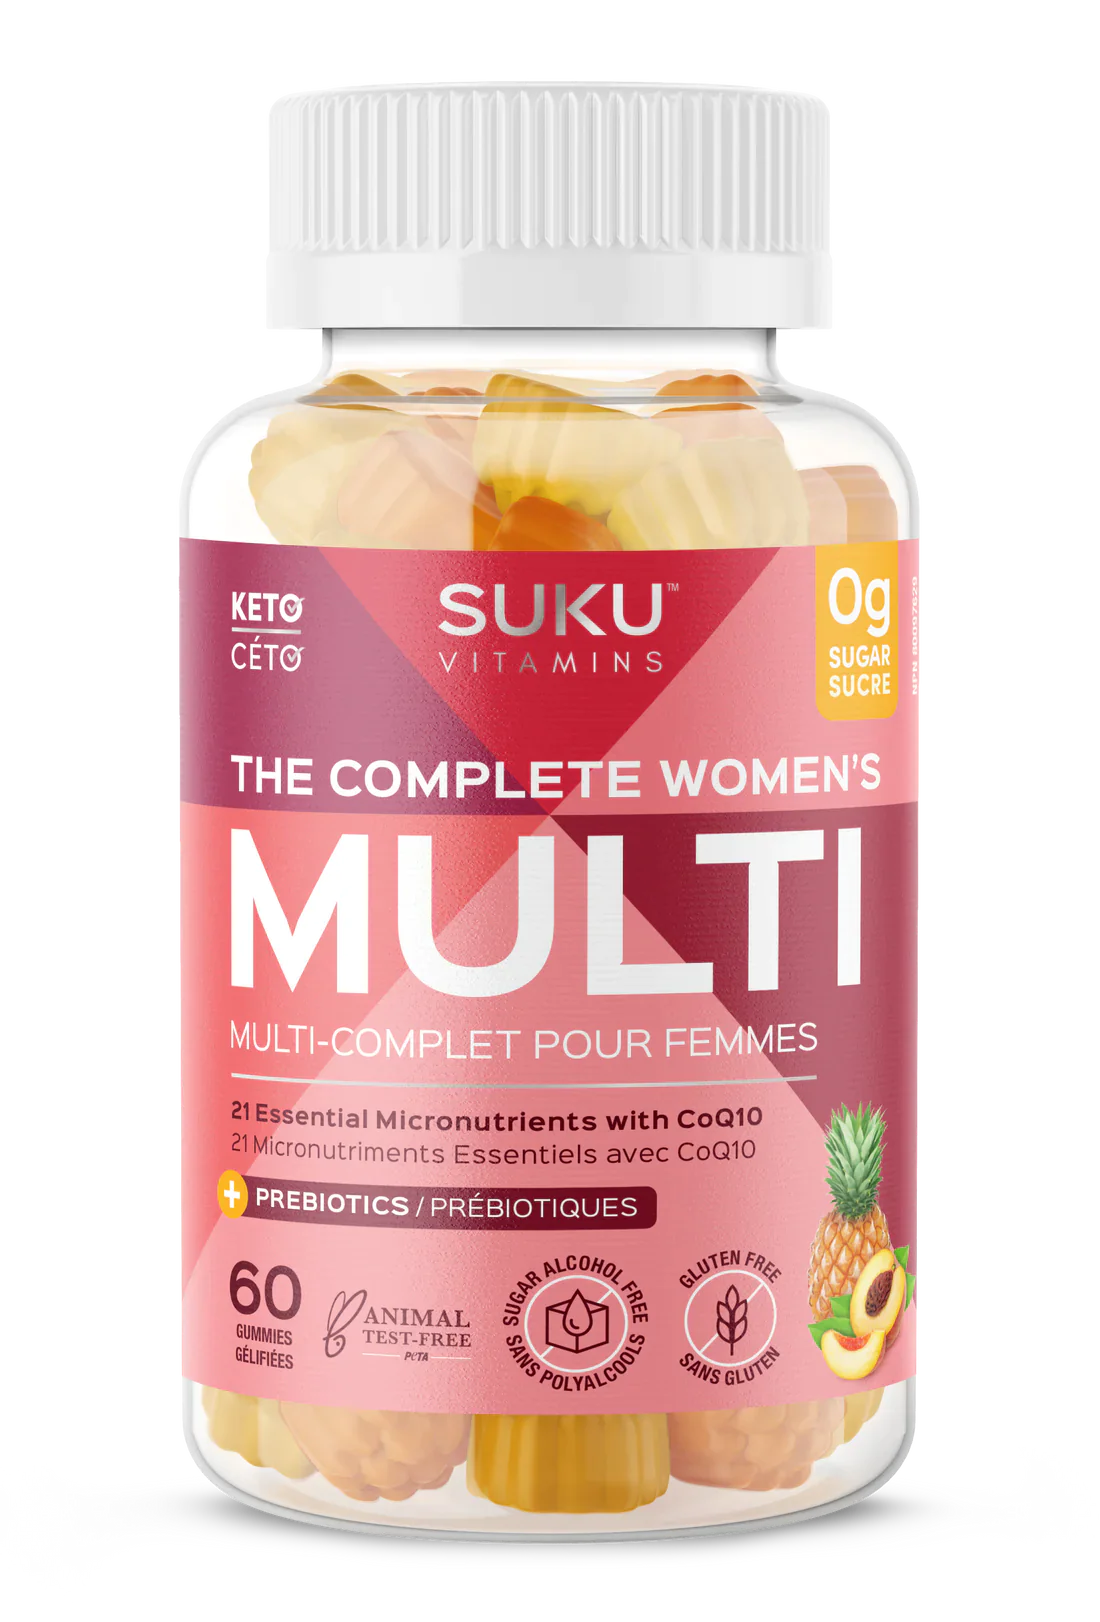 The Complete Womens Multi - Multi-complet pour femmes